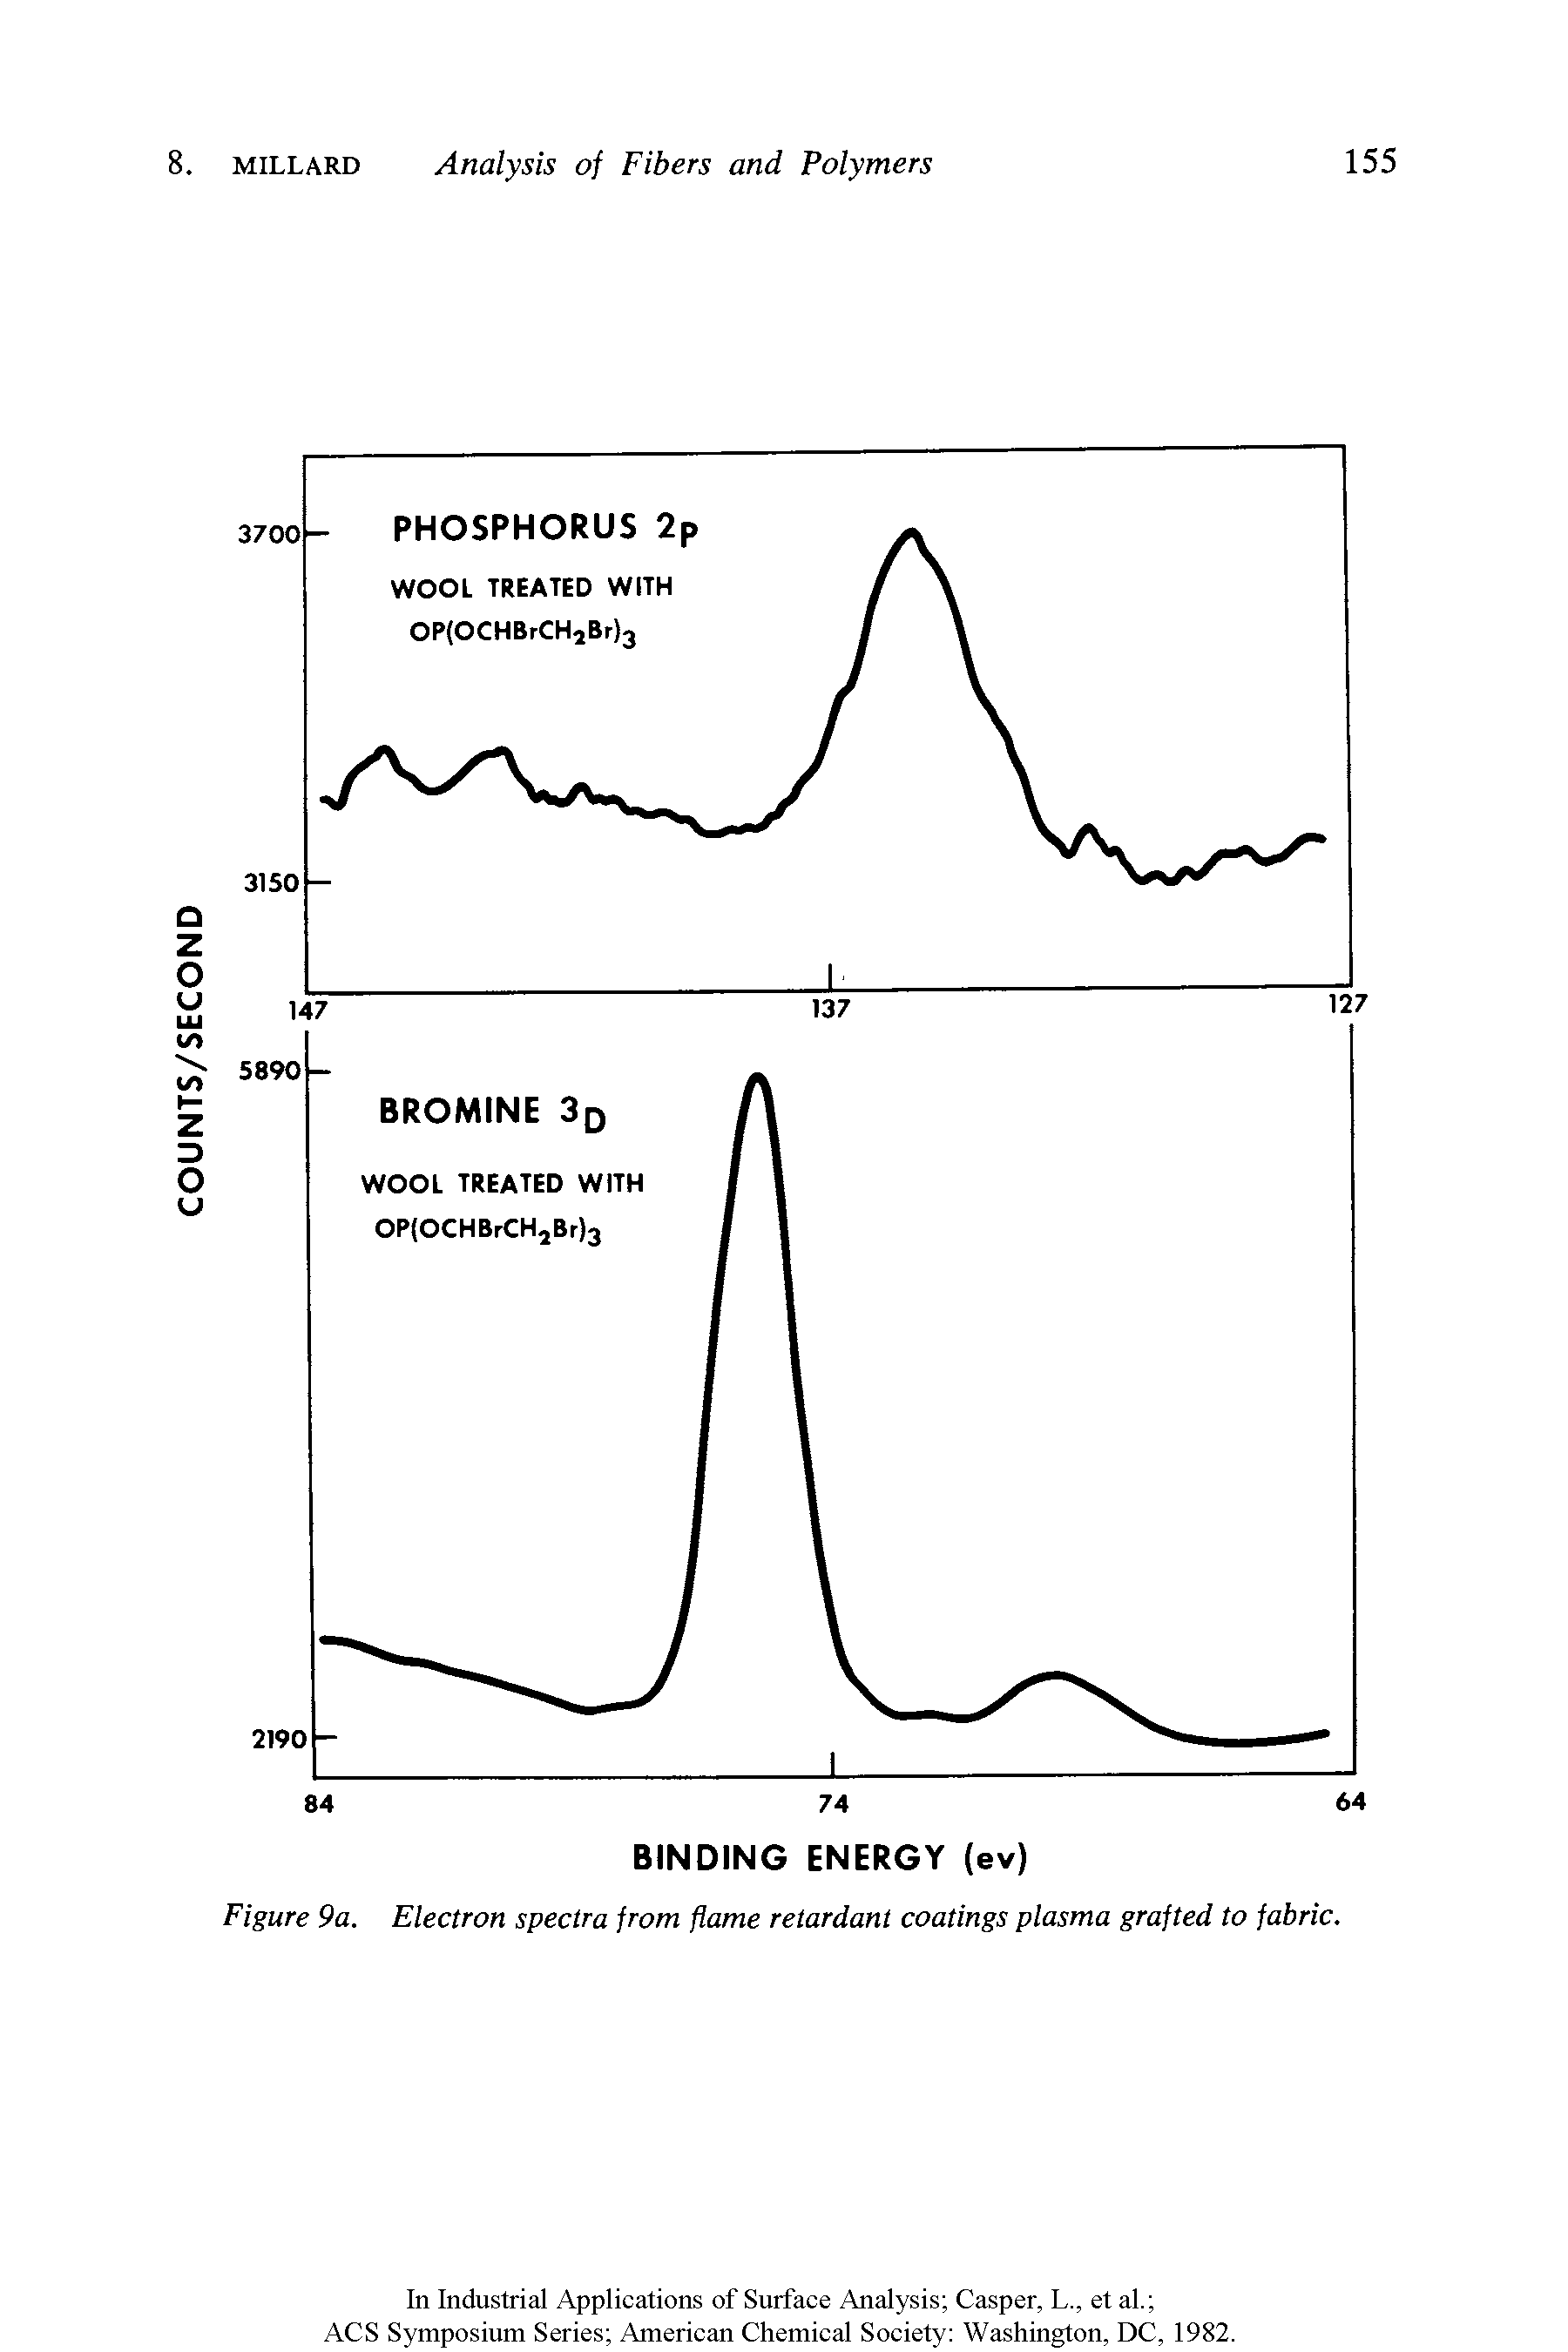 Figure 9a. Electron spectra from flame retardant coatings plasma grafted to fabric.